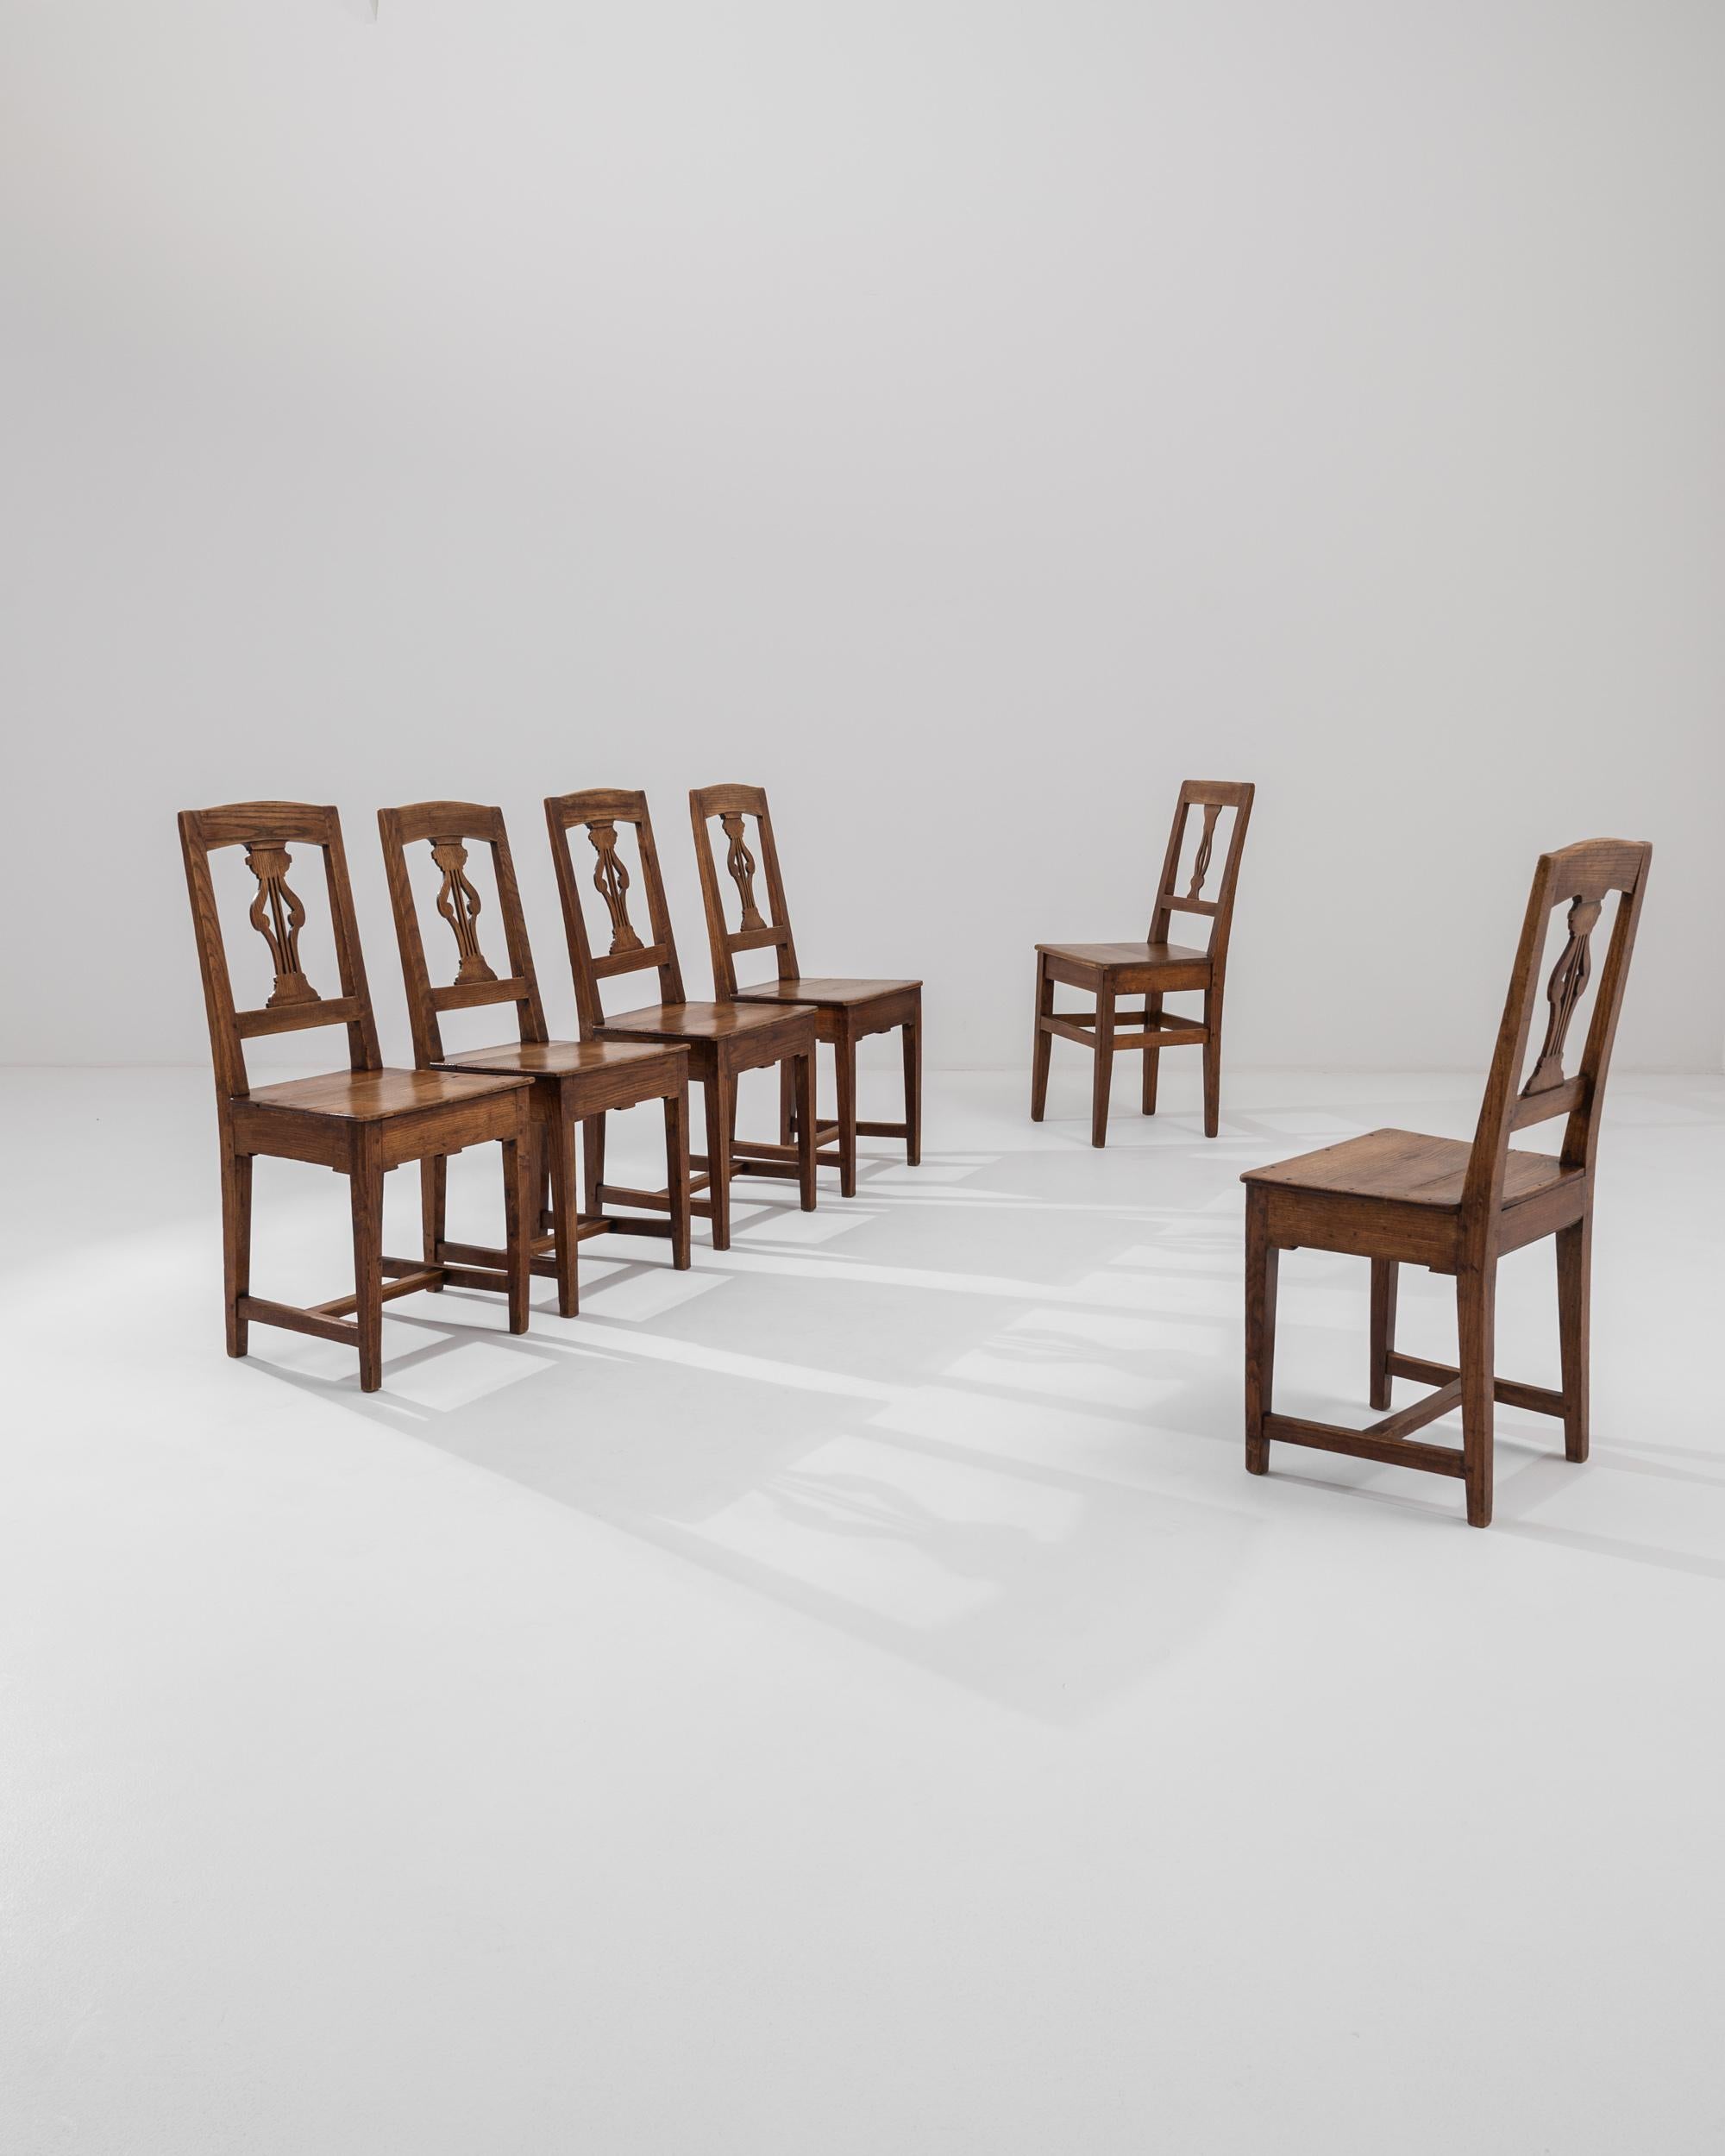 This set of six turn of the century dining chairs combines a graceful shape with a beautiful patina. Made in France, the design takes inspiration from the restrained elegance of Biedermeier furniture. Lyre-shaped splats lend a poetic note to the